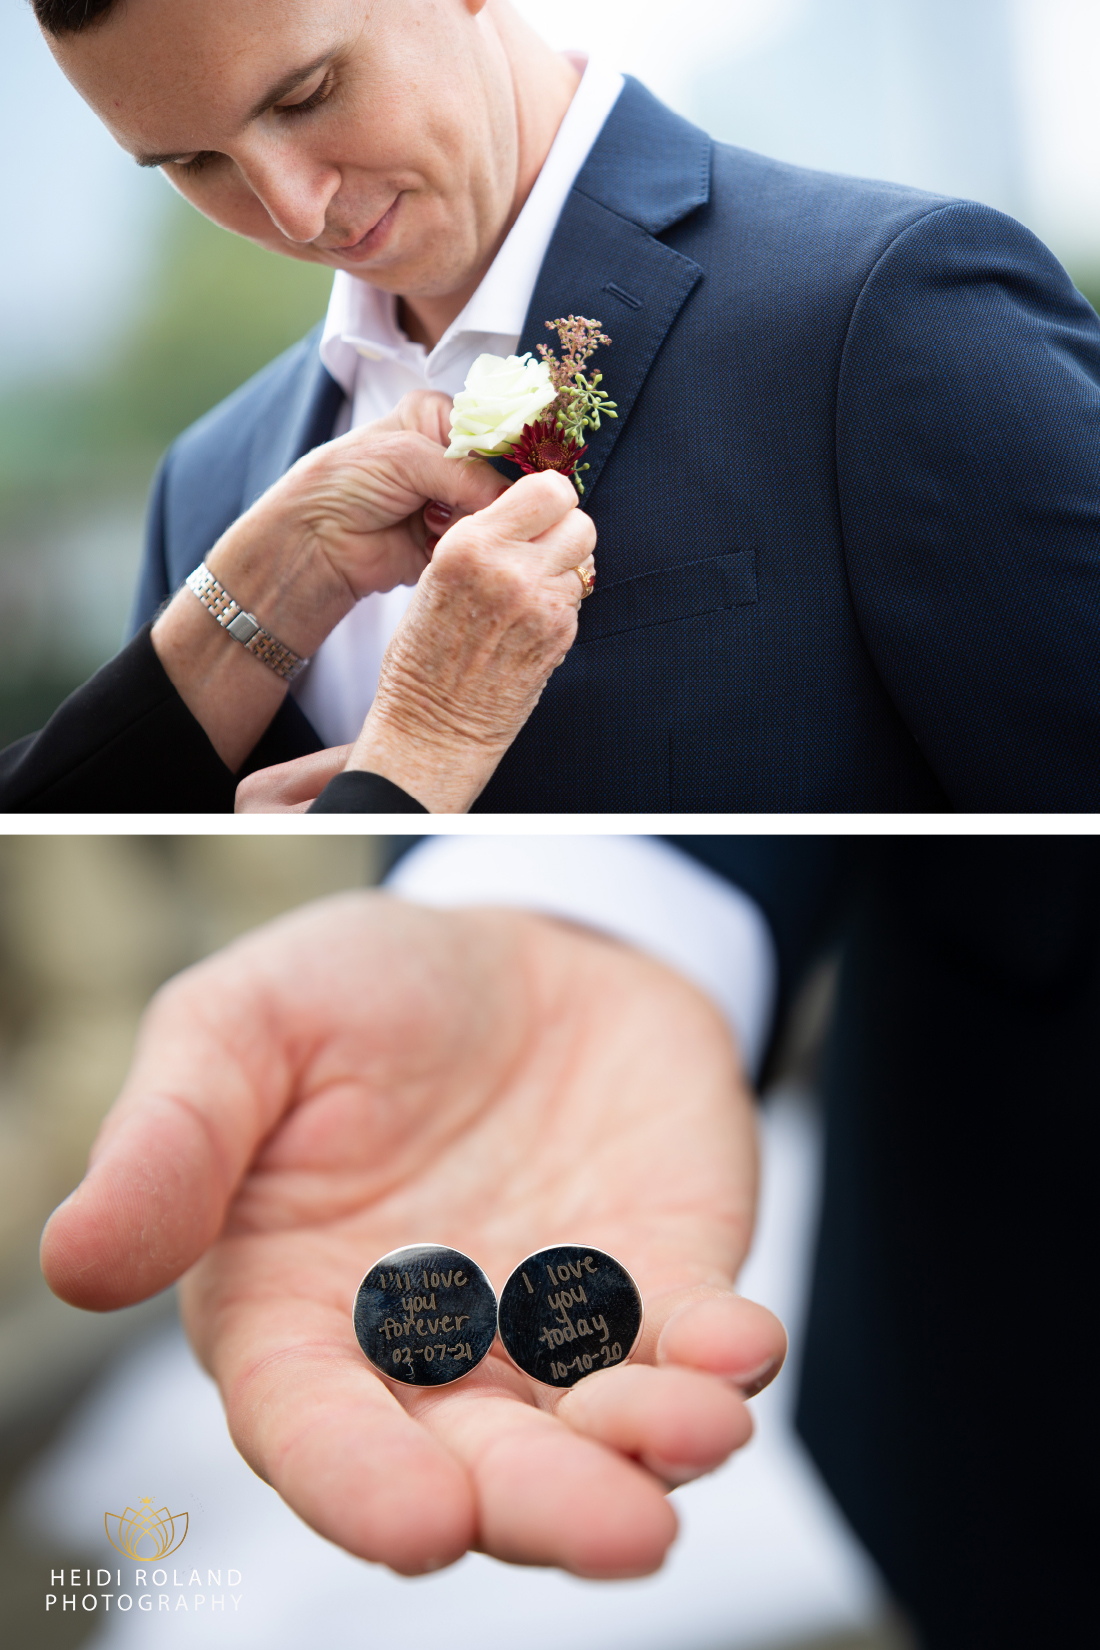 Groom boutonniere and cufflinks